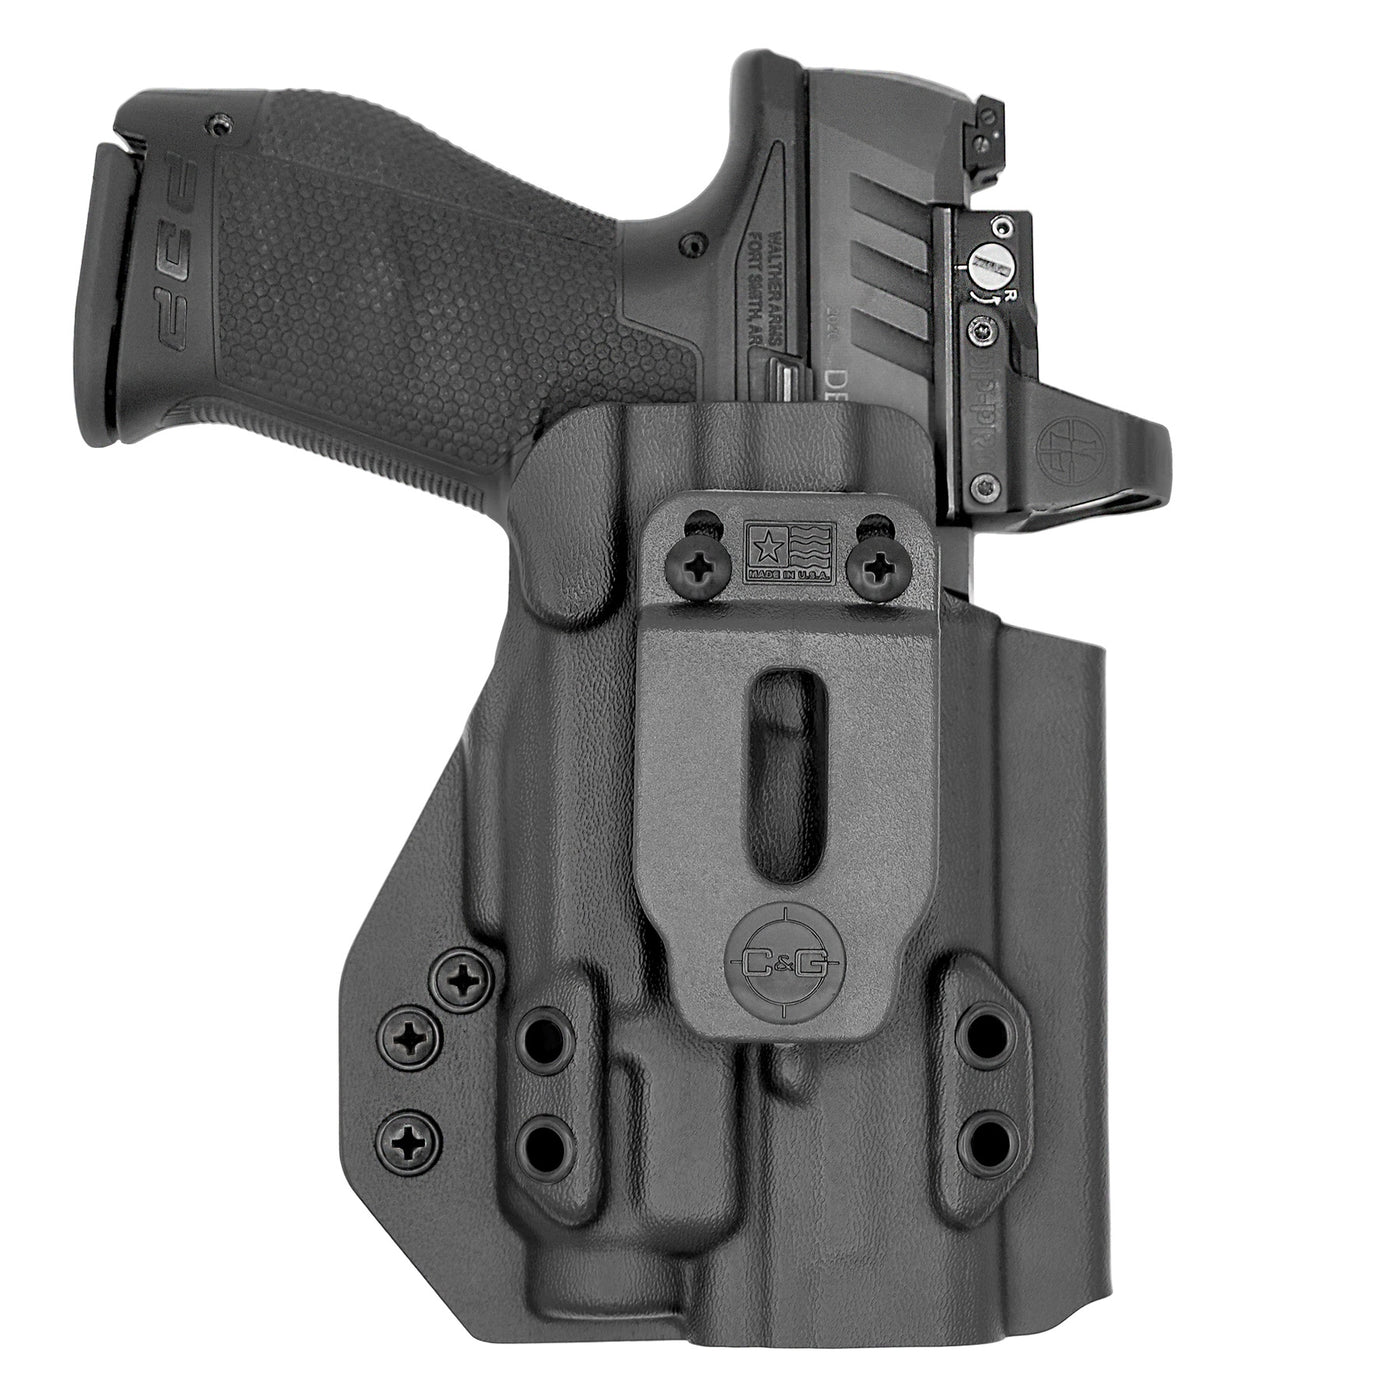 C&G Holsters custom IWB Tactical M&P 9/40 Streamlight TLR7/A in holstered position